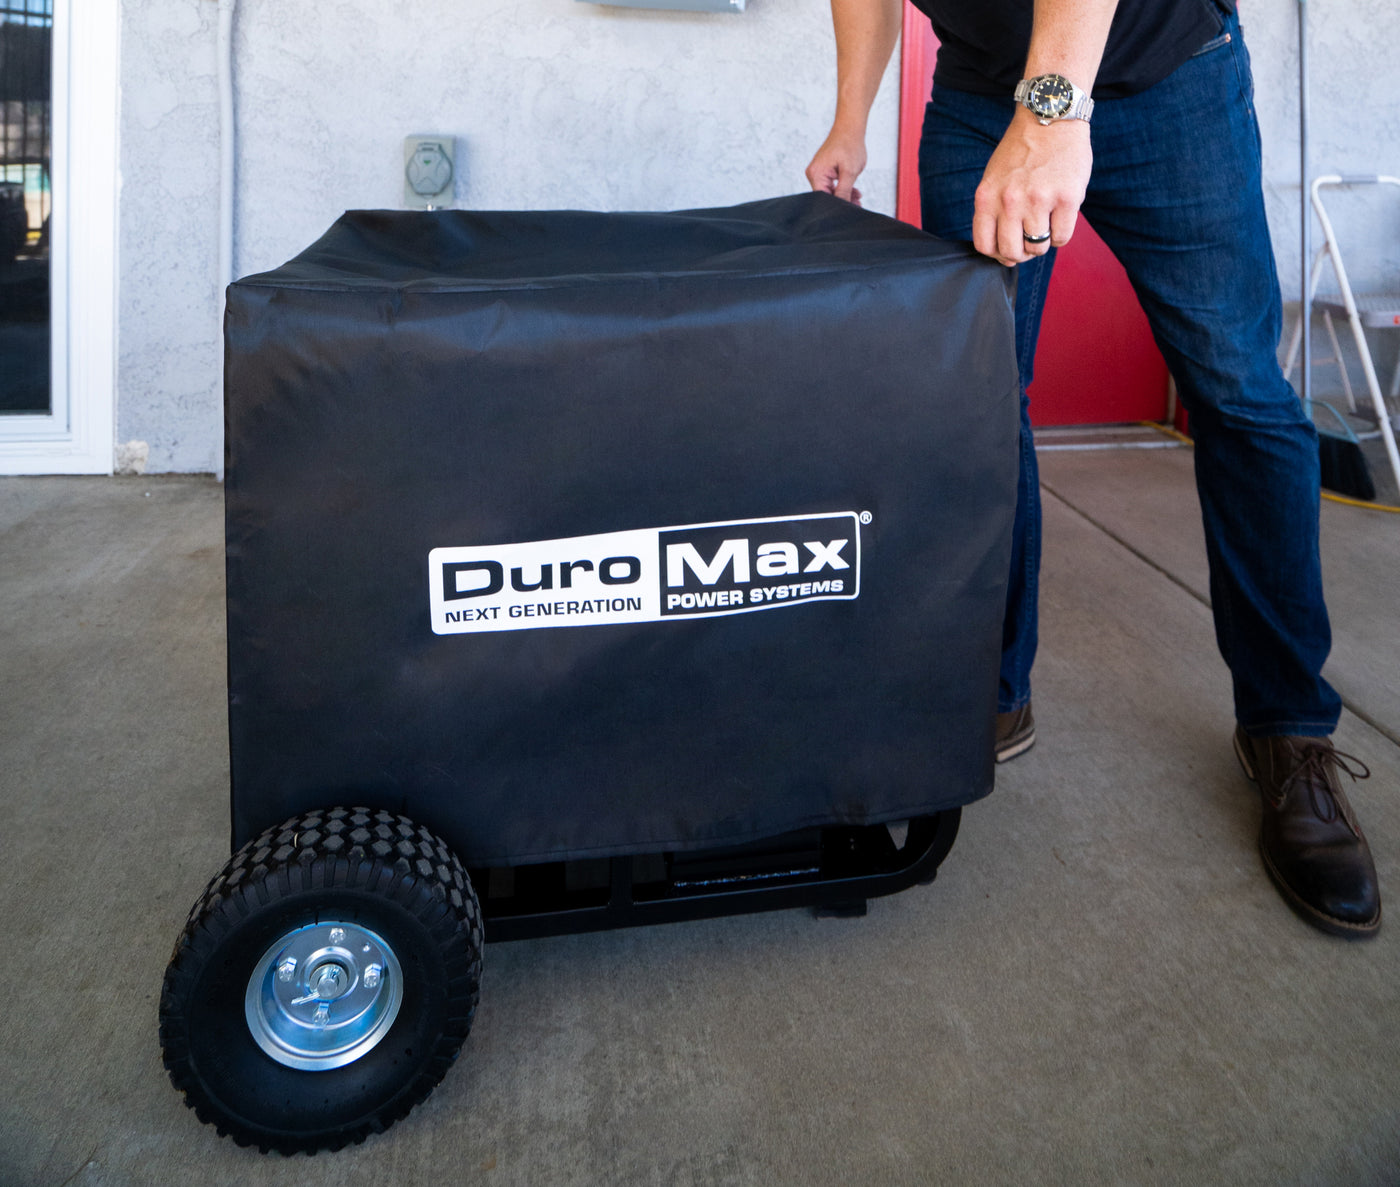 DuroMax  Large Weather Resistant Portable Generator Dust Guard Cover